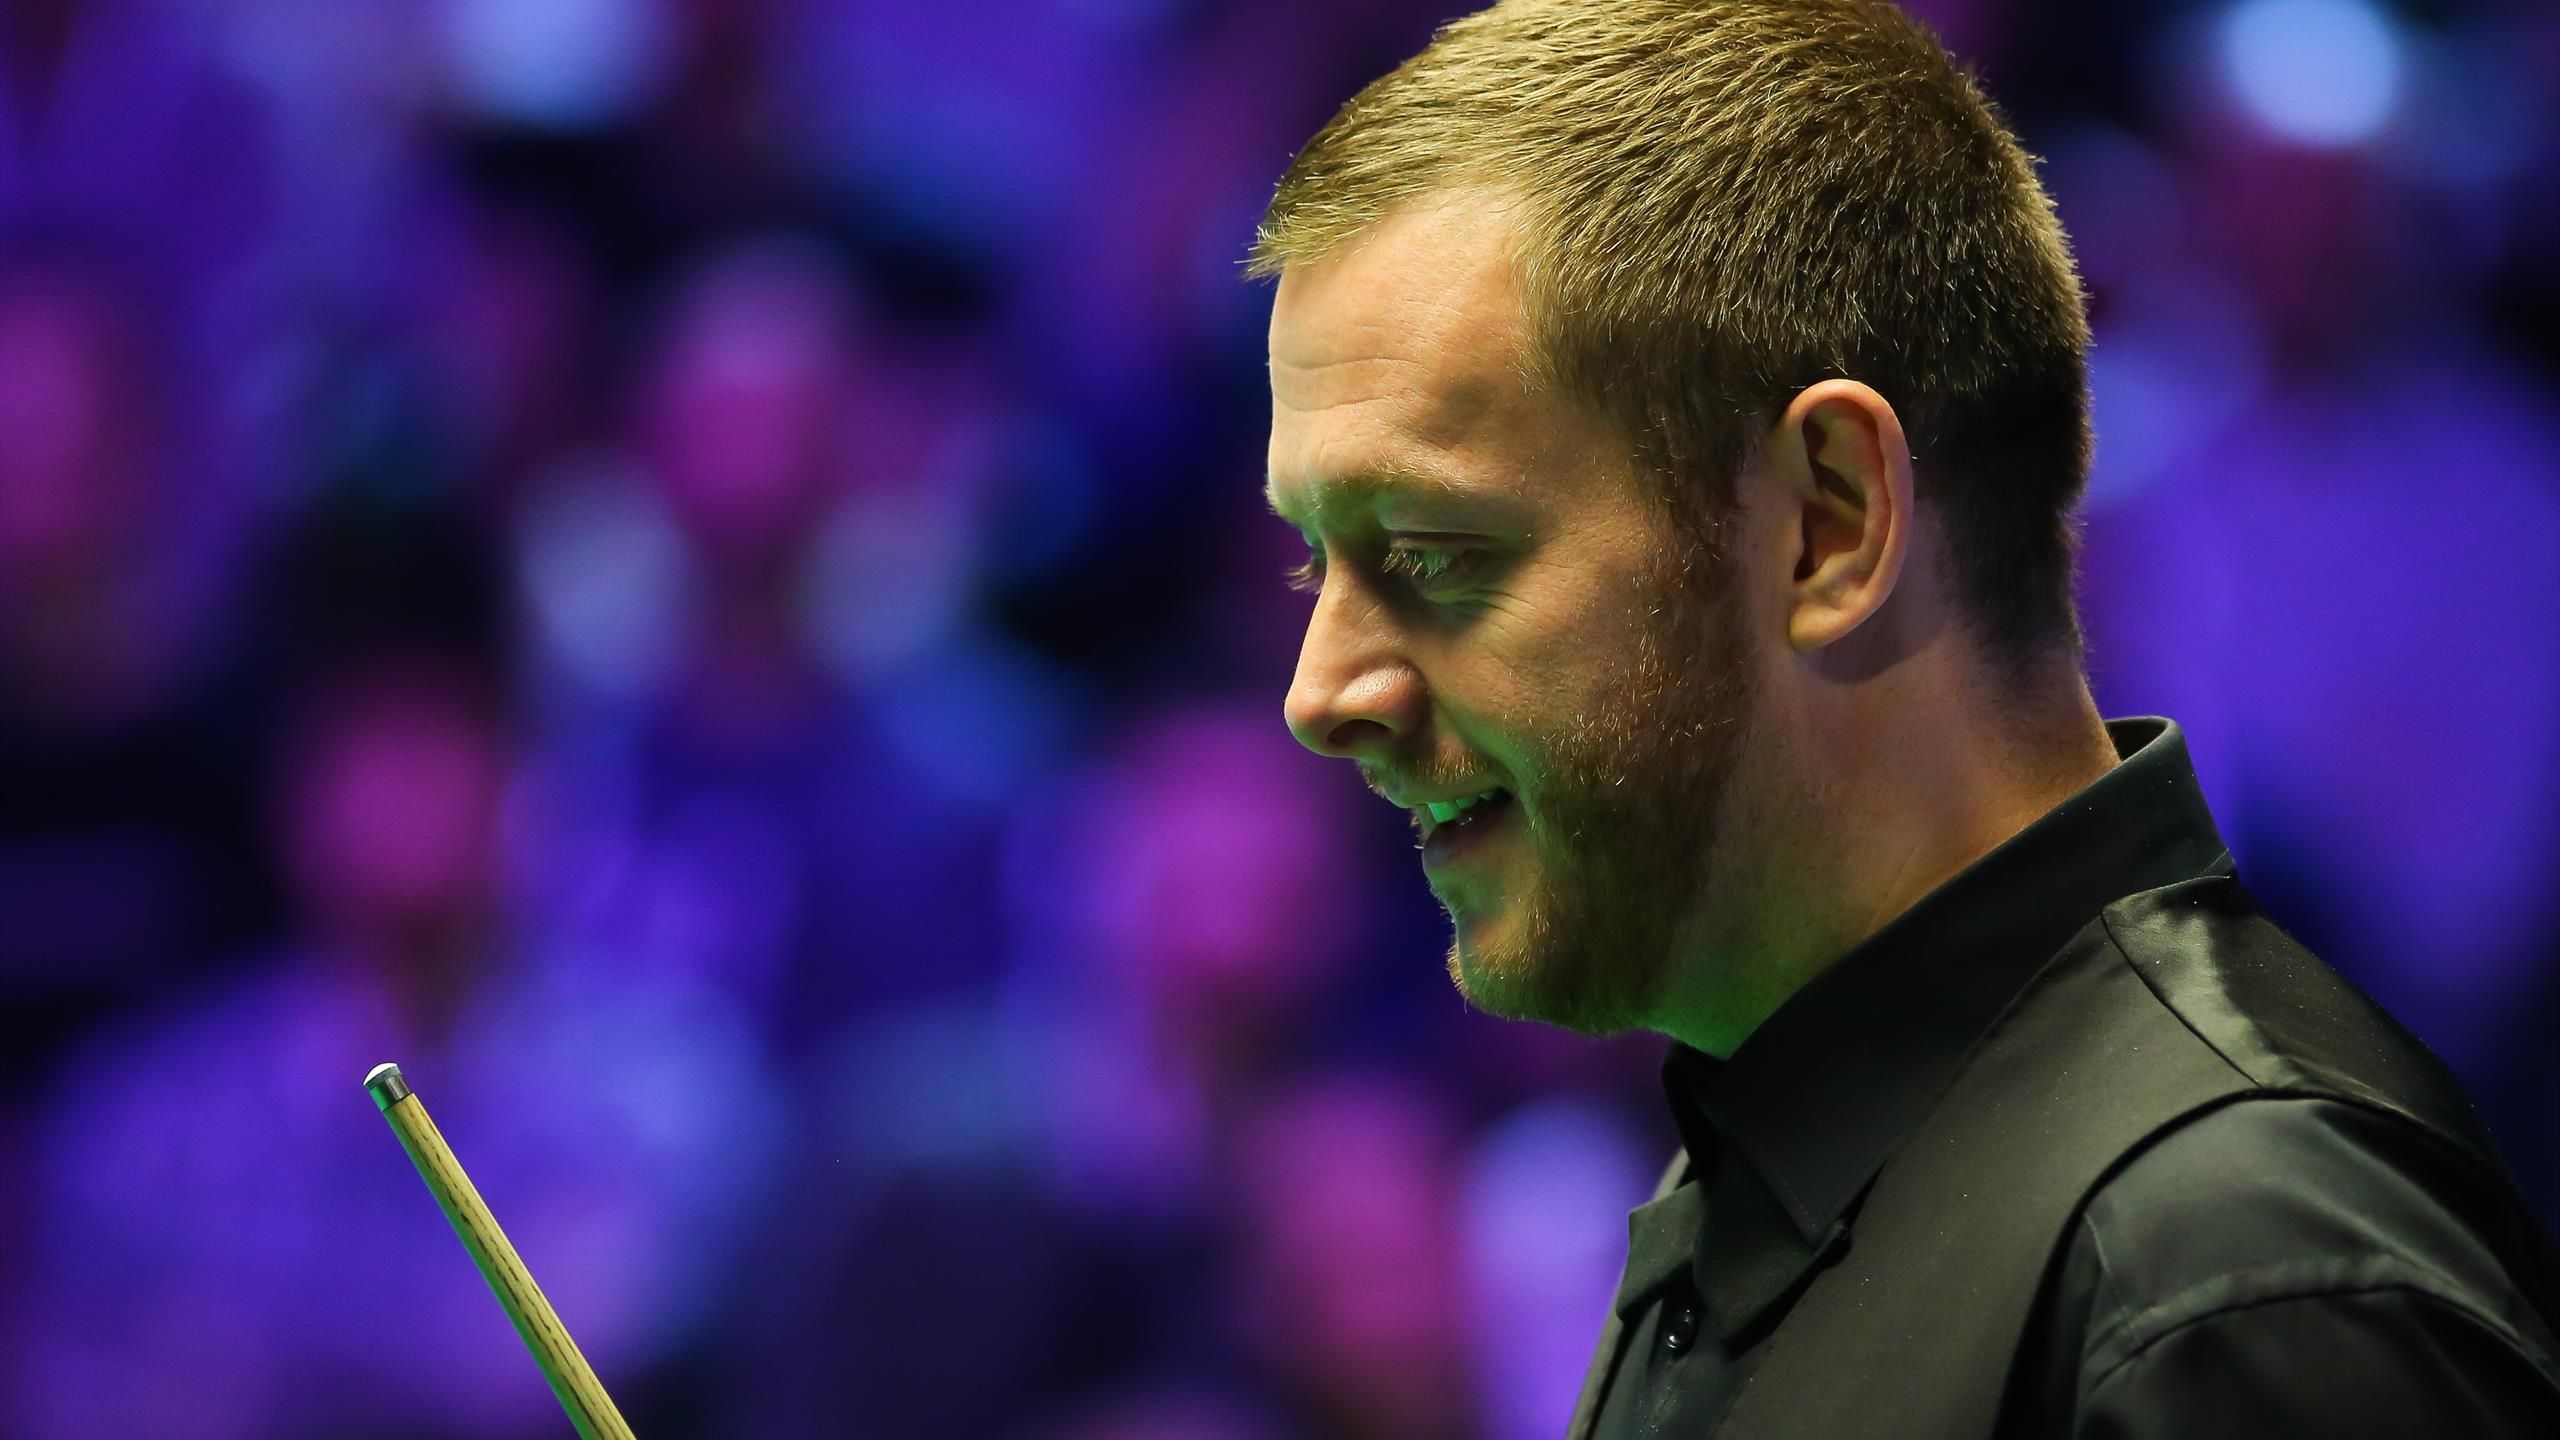 He was the better player - Mark Allen relieved to reach UK Championship final after comeback win over Jack Lisowski